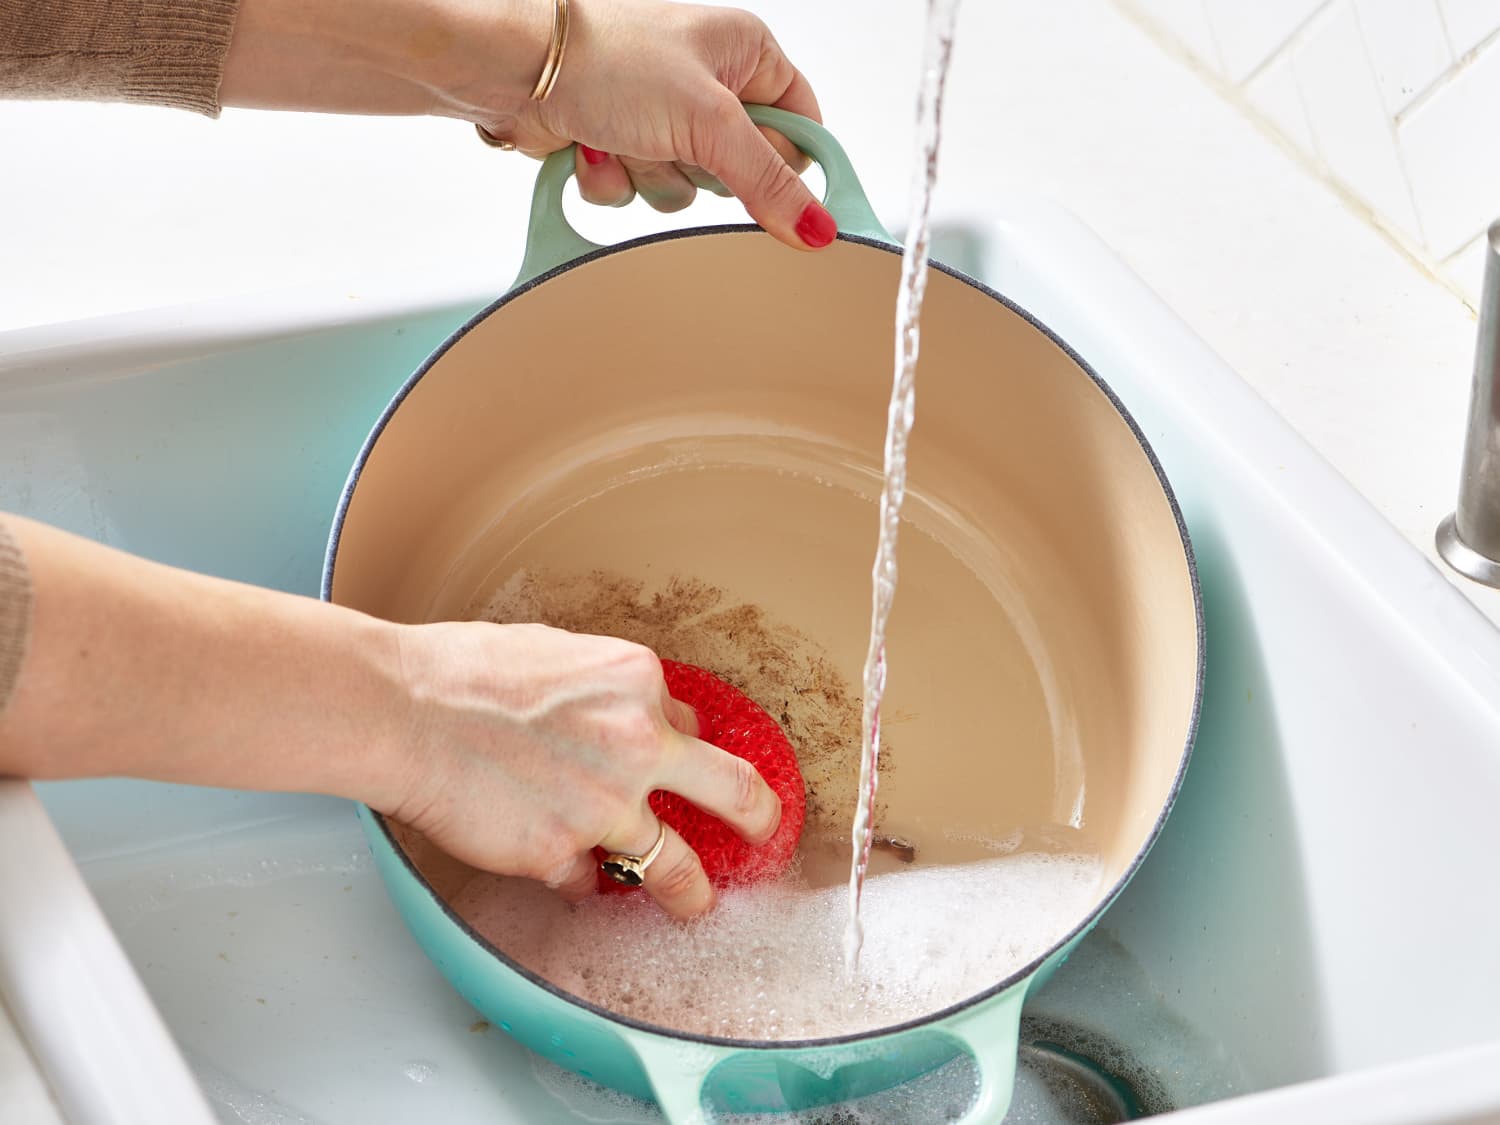 How to Save Water While Washing Dishes